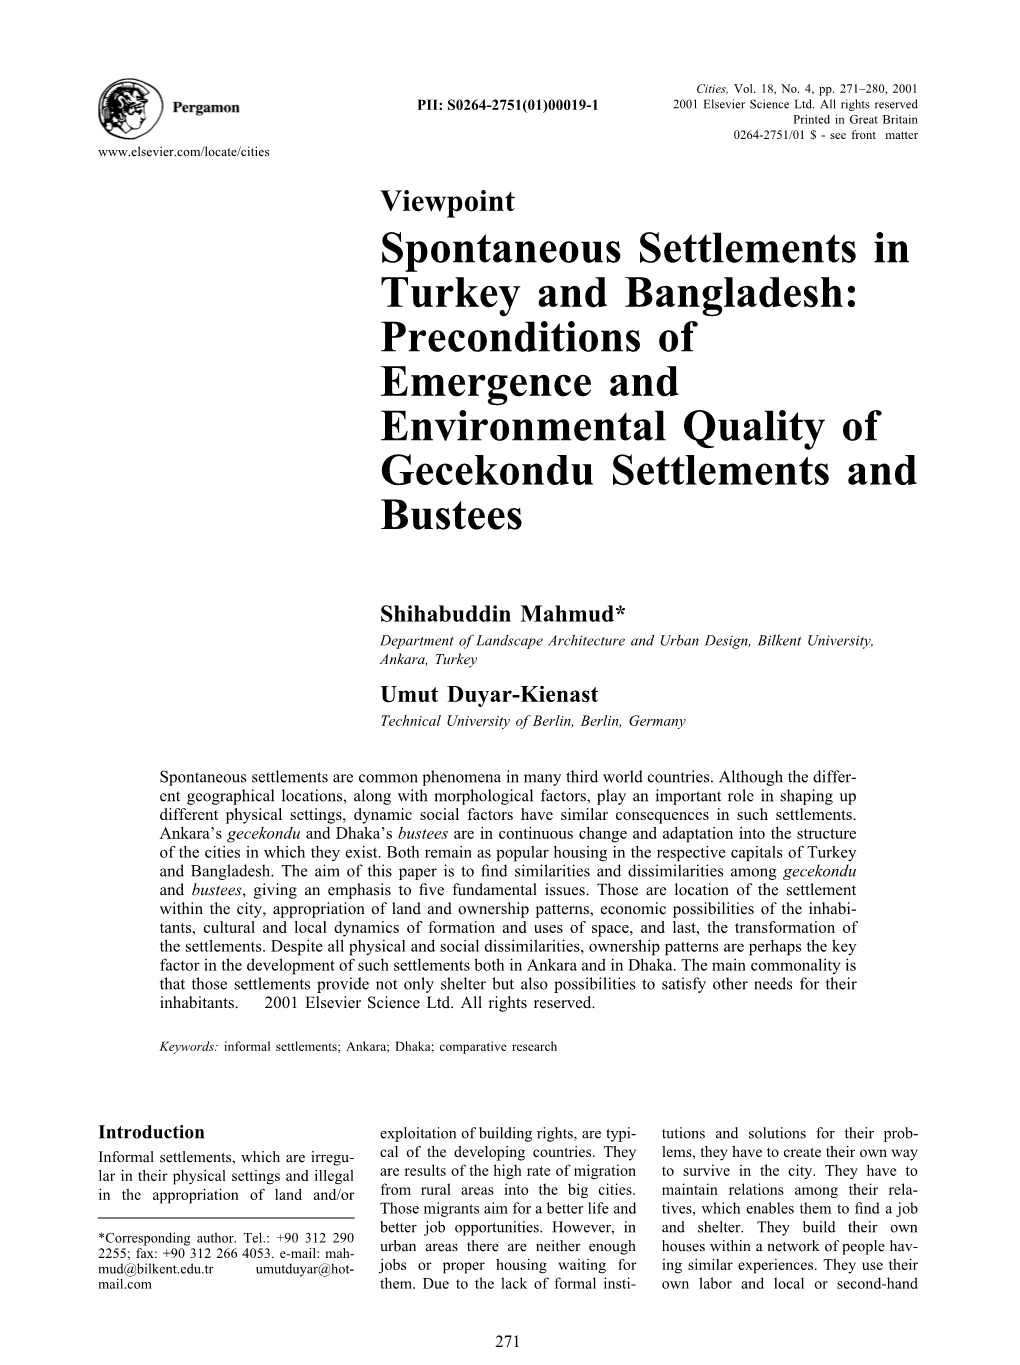 Spontaneous Settlements in Turkey and Bangladesh: Preconditions of Emergence and Environmental Quality of Gecekondu Settlements and Bustees